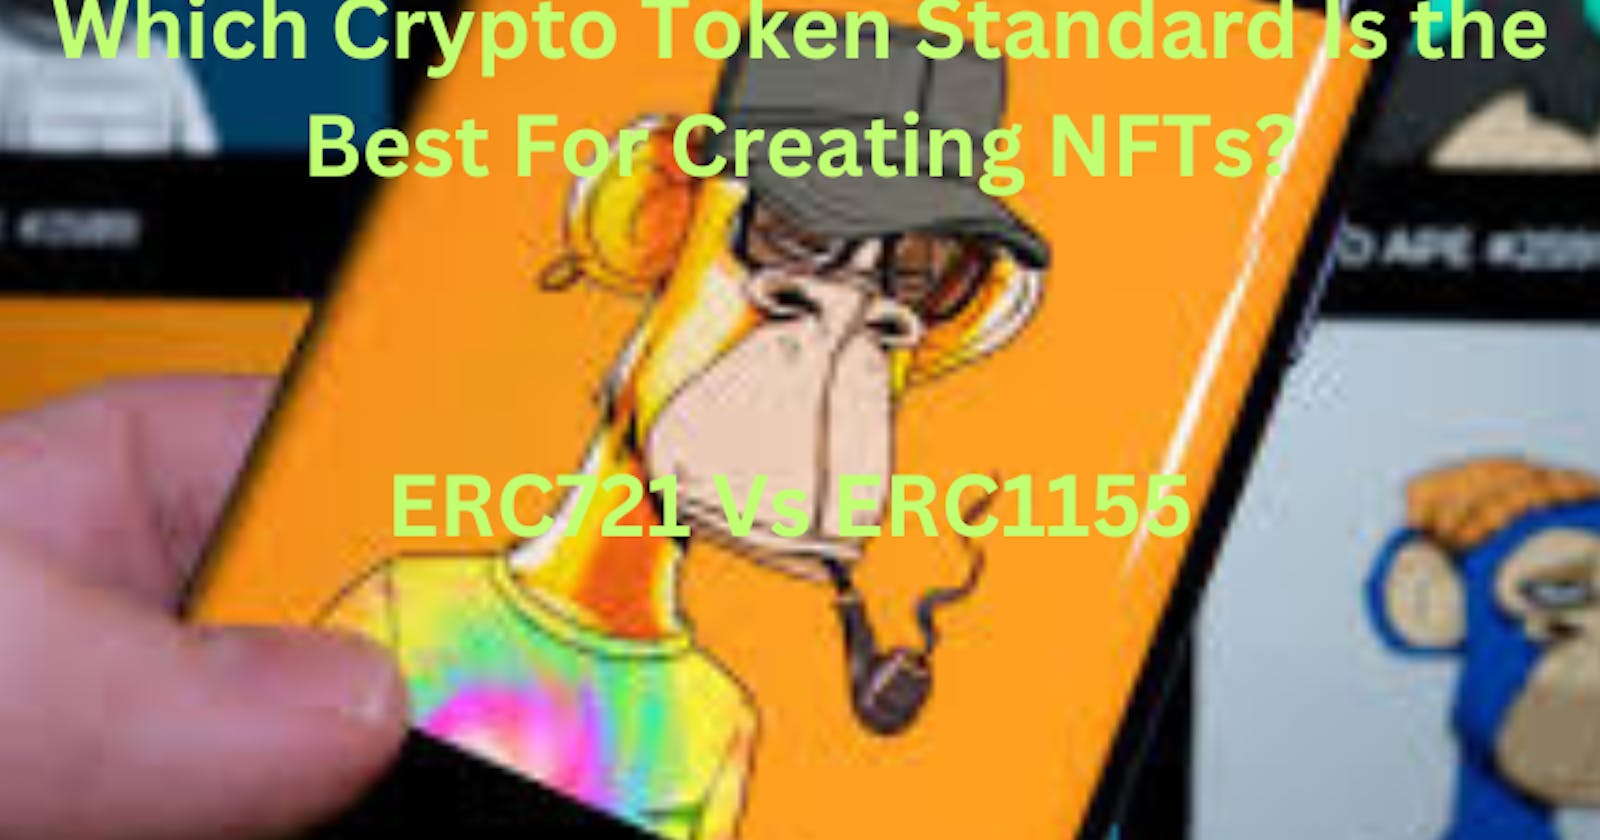 Which Crypto Token Standard Is the Best For Creating NFTs?